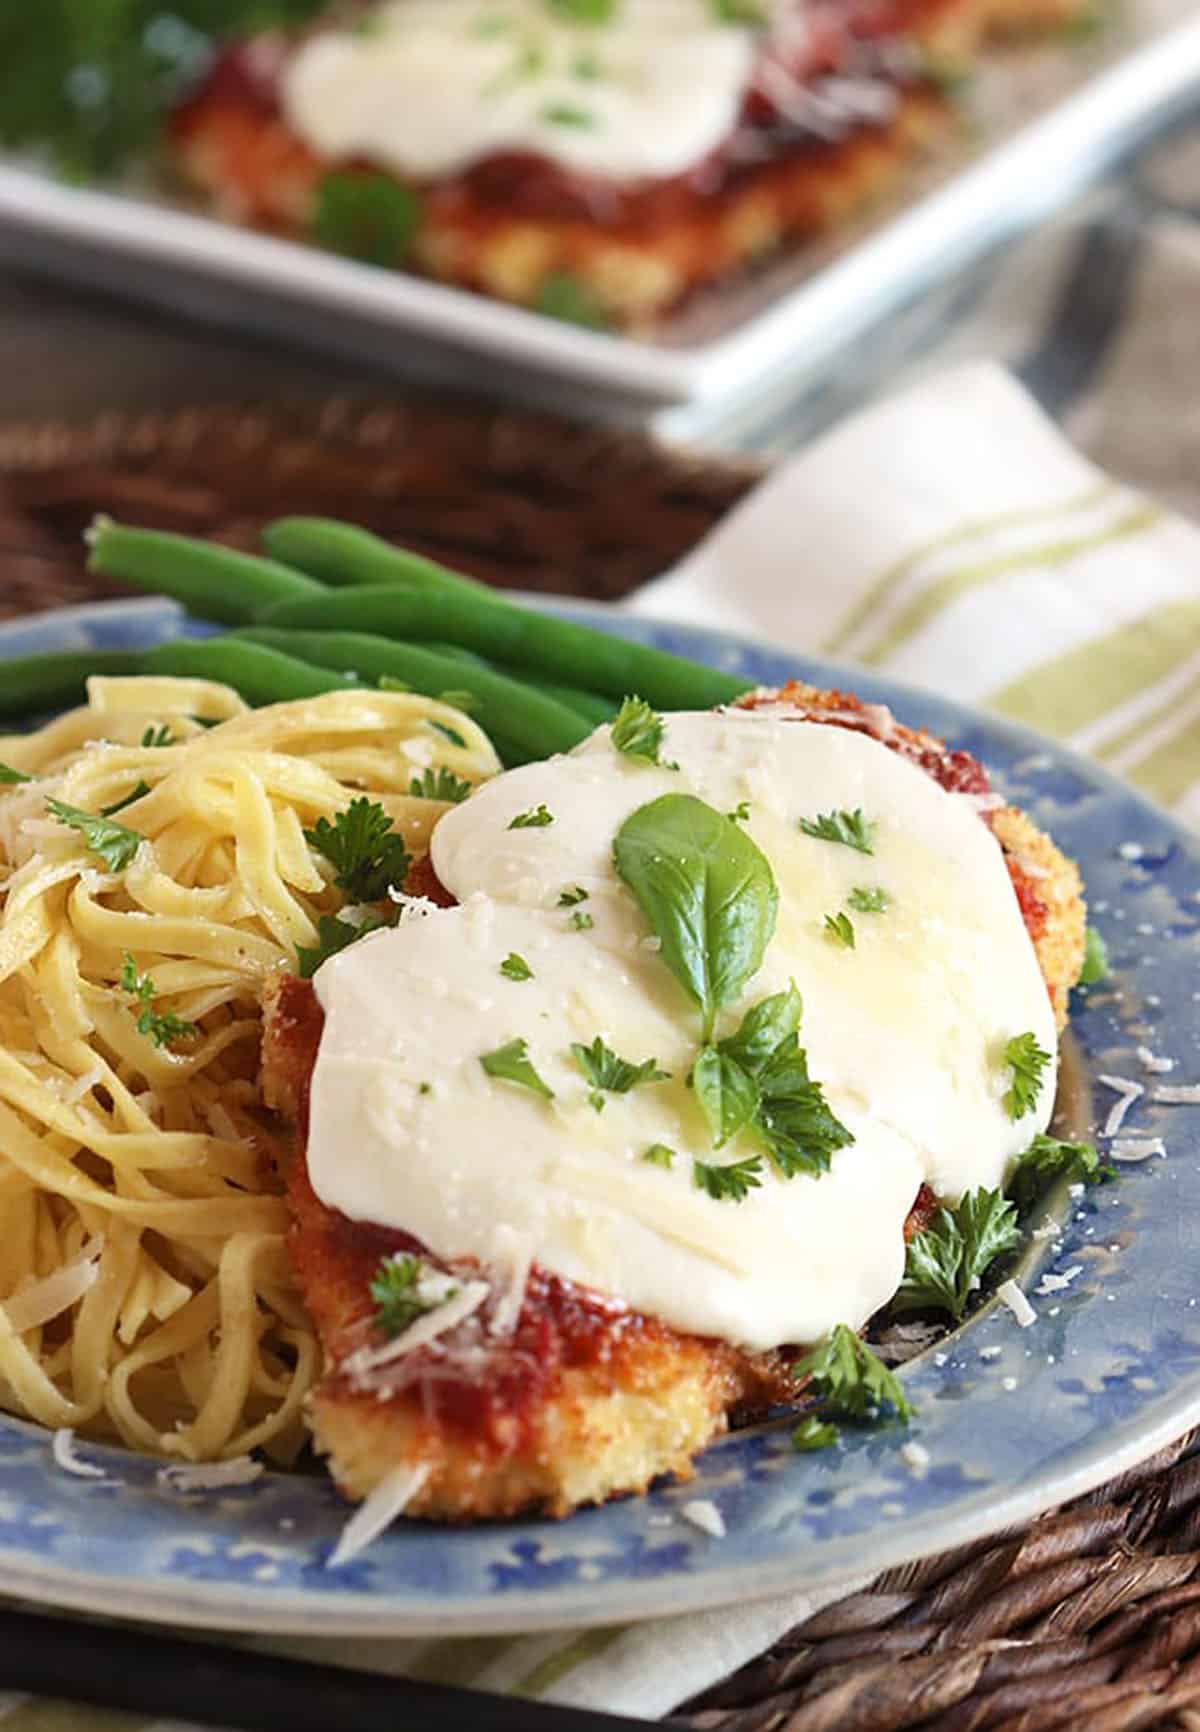 Chicken parmesan topped with basil on a blue plate with pasta and green beans.